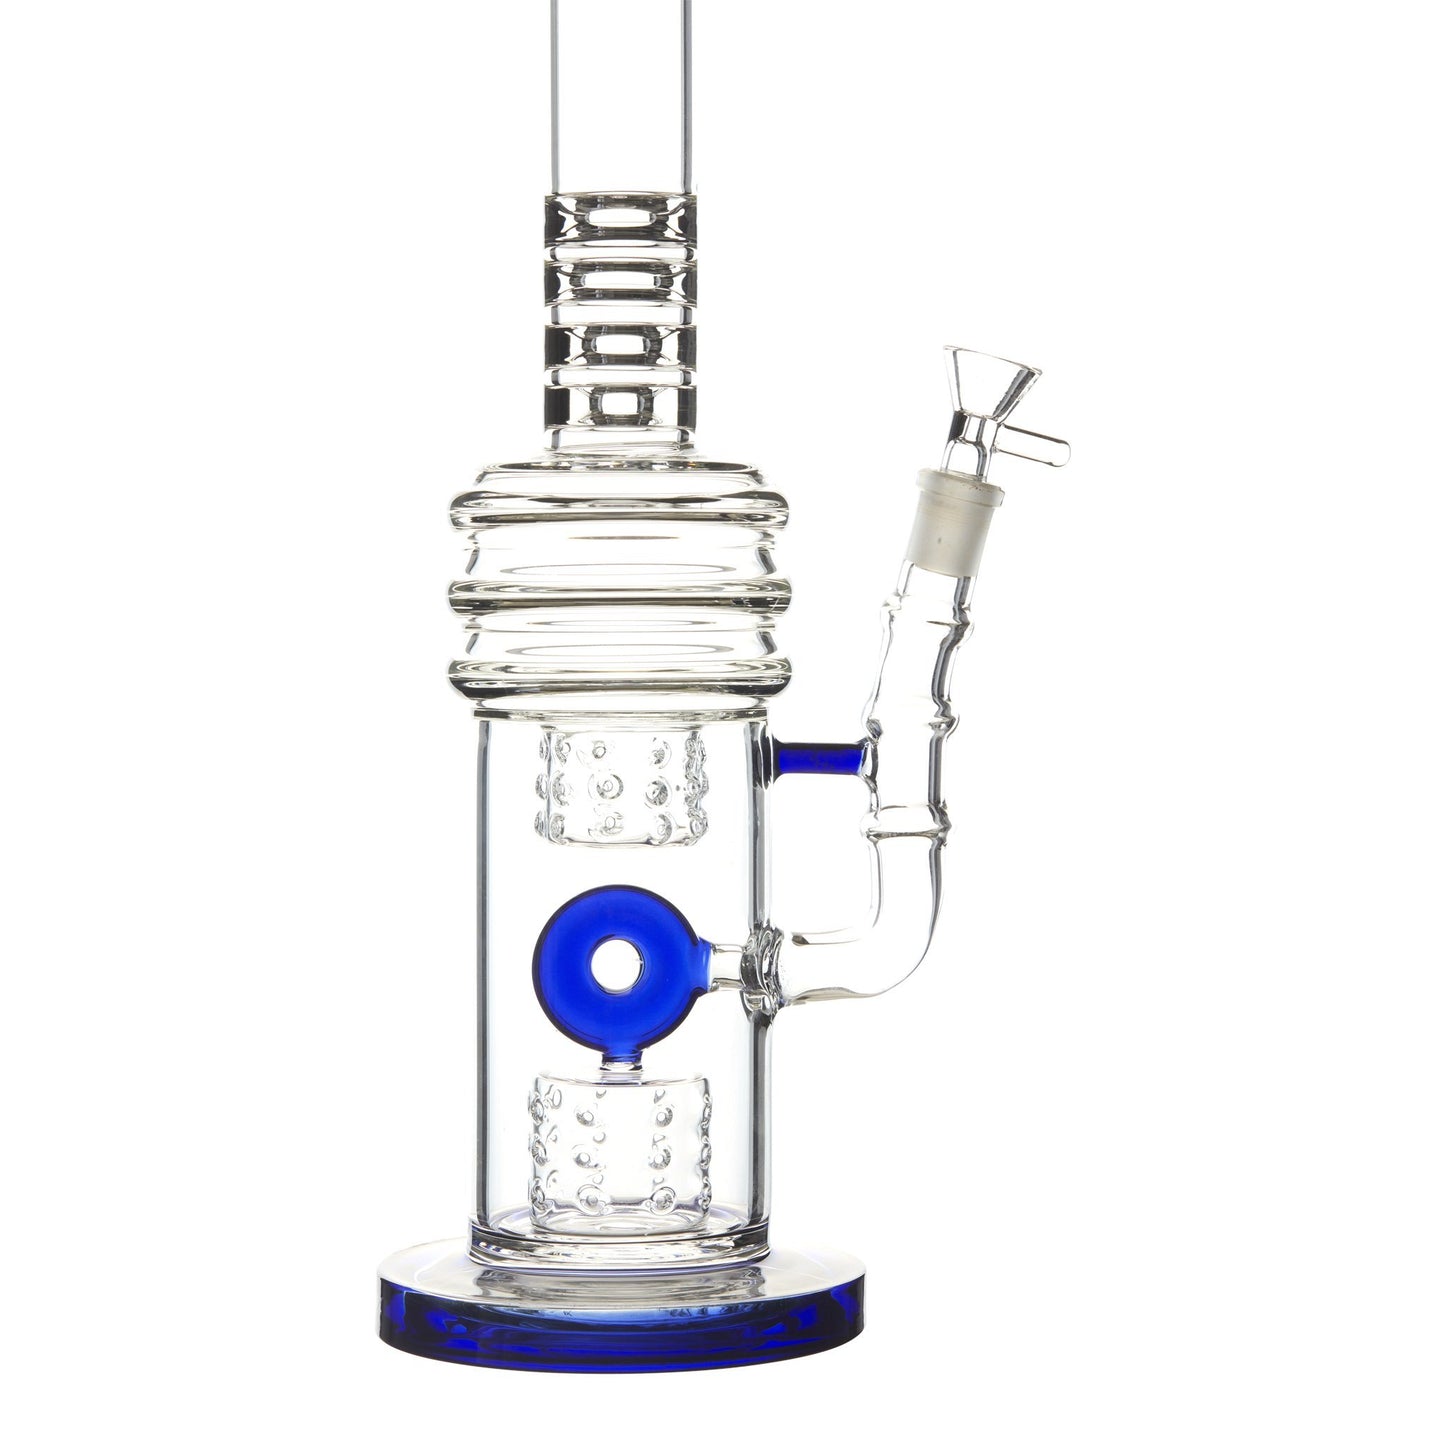 Blue 15-inch glass bong smoking device donut downstem colorful accents sleek and classic look sturdy base